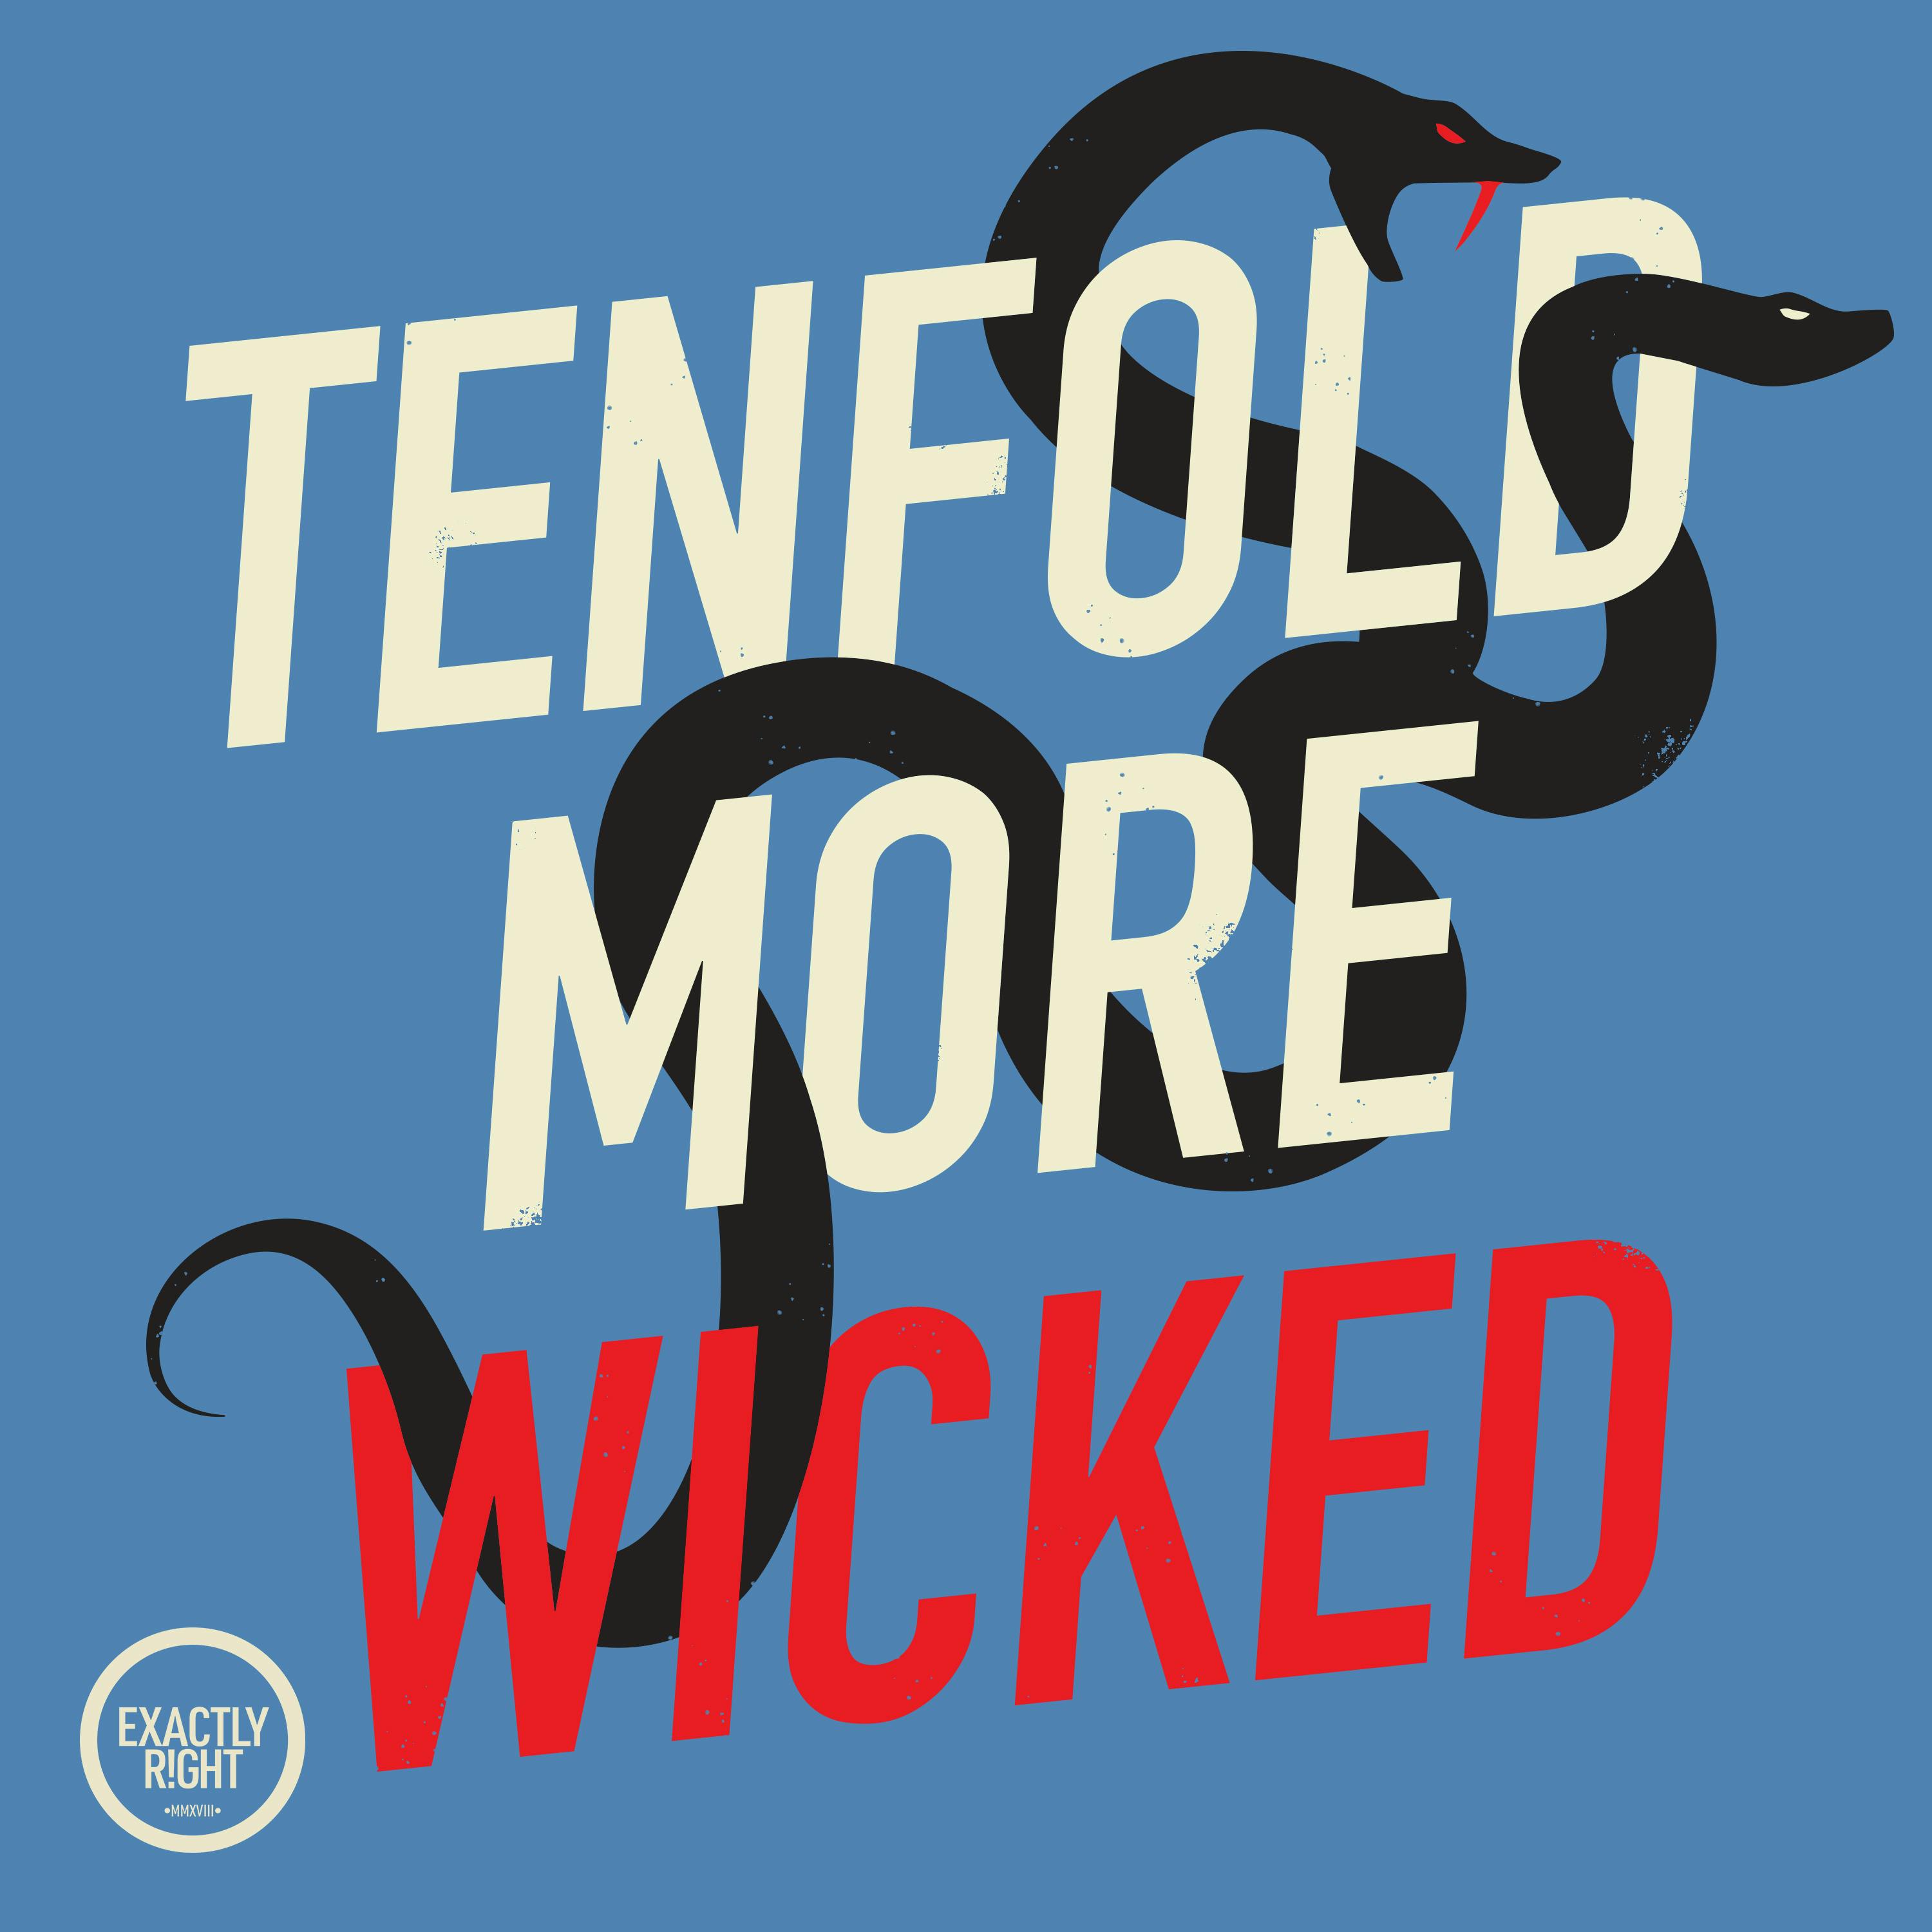 Tenfold More Wicked - Entitled: Consecrated Ground